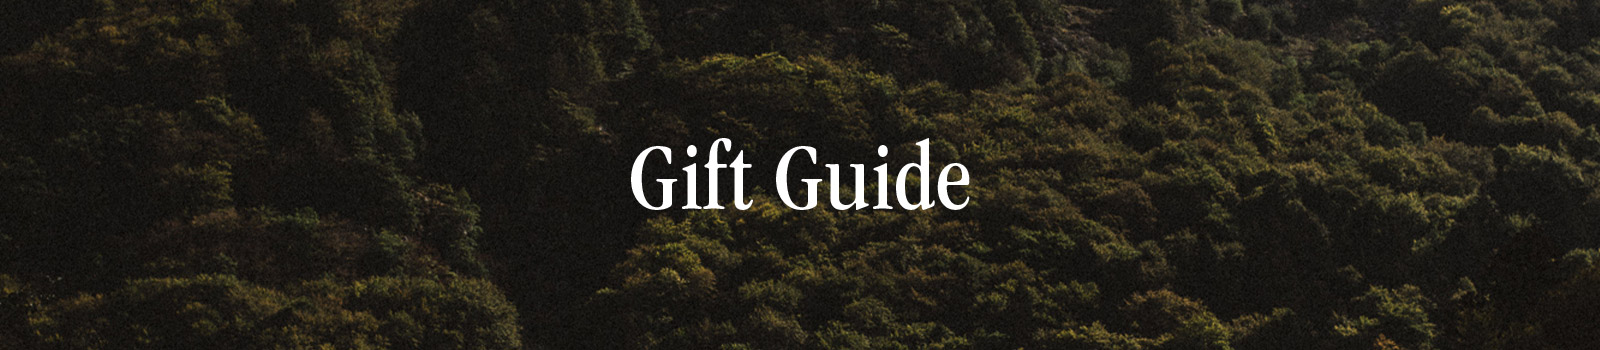 Gift Guide All Gifts Category Banner